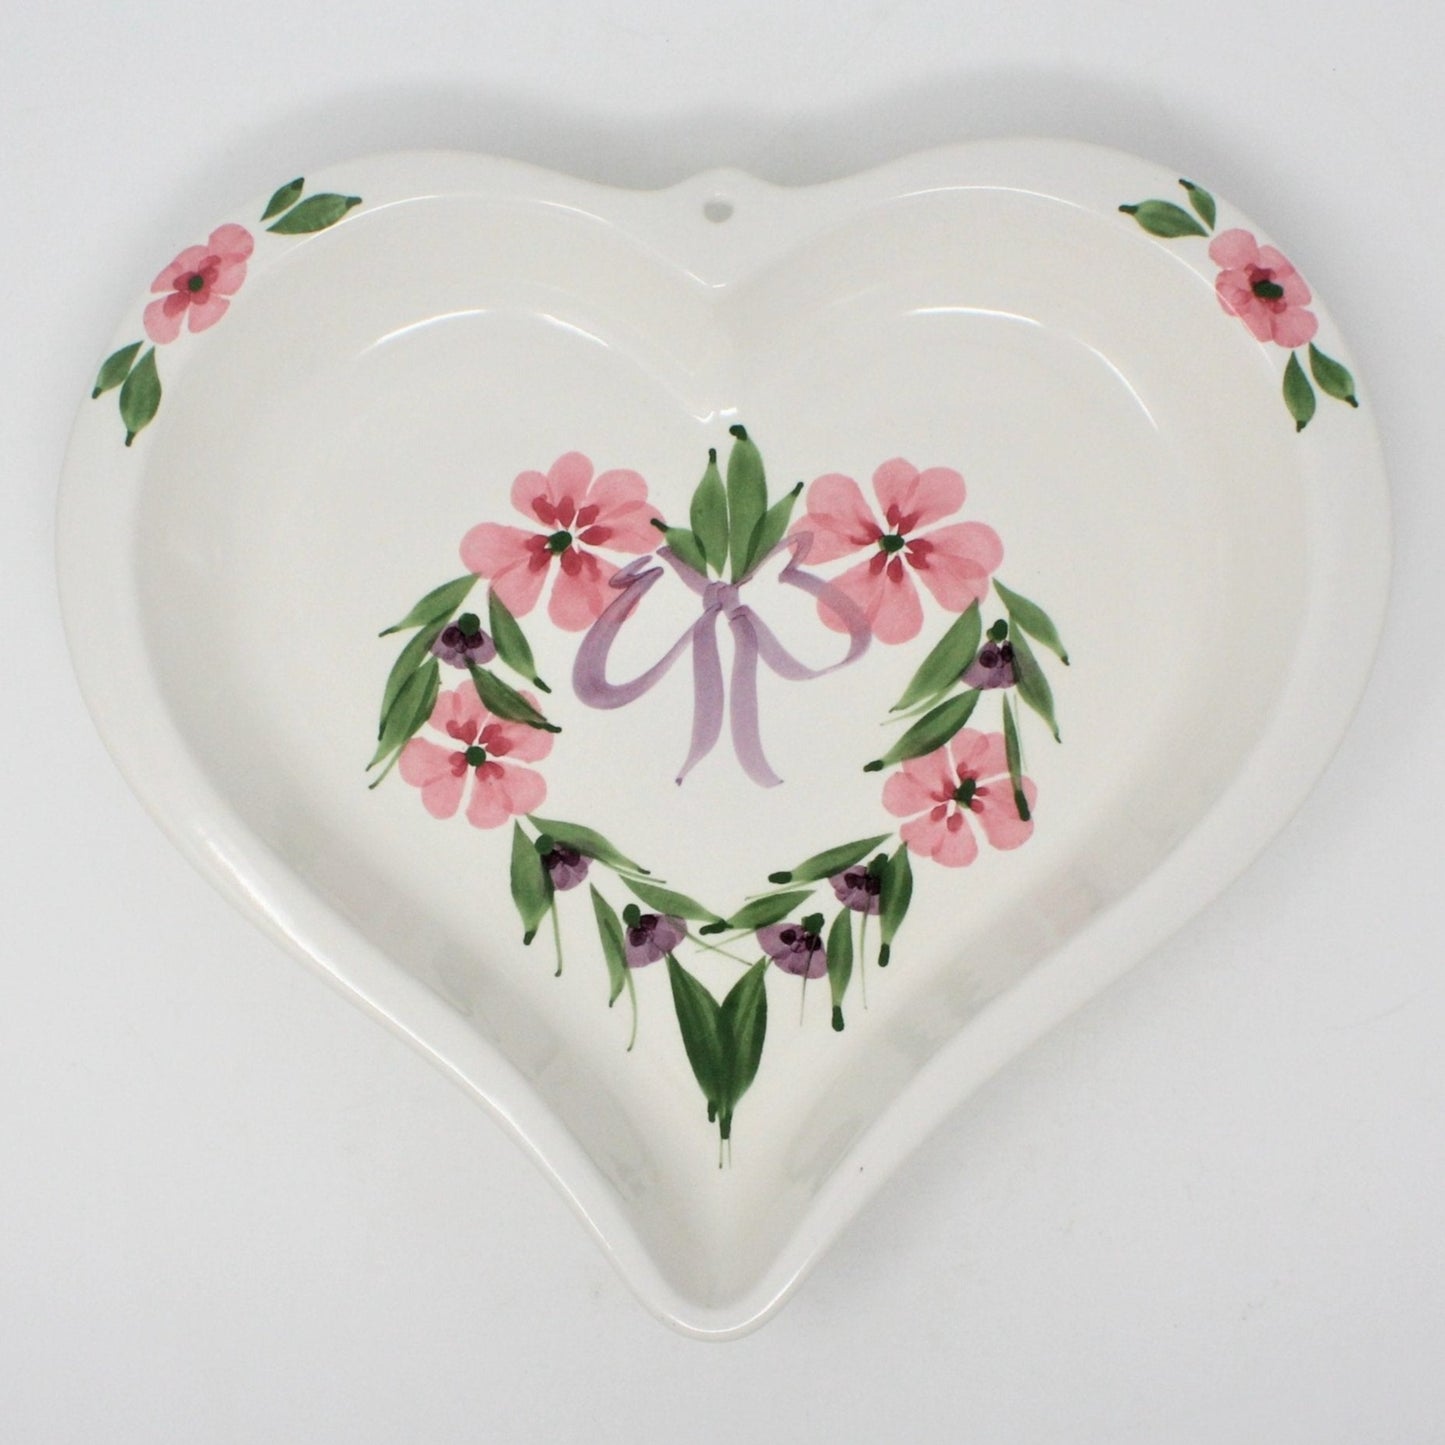 Decorative Mold, Heart Shaped, Hand Painted Pink Floral, Ceramic, Vintage